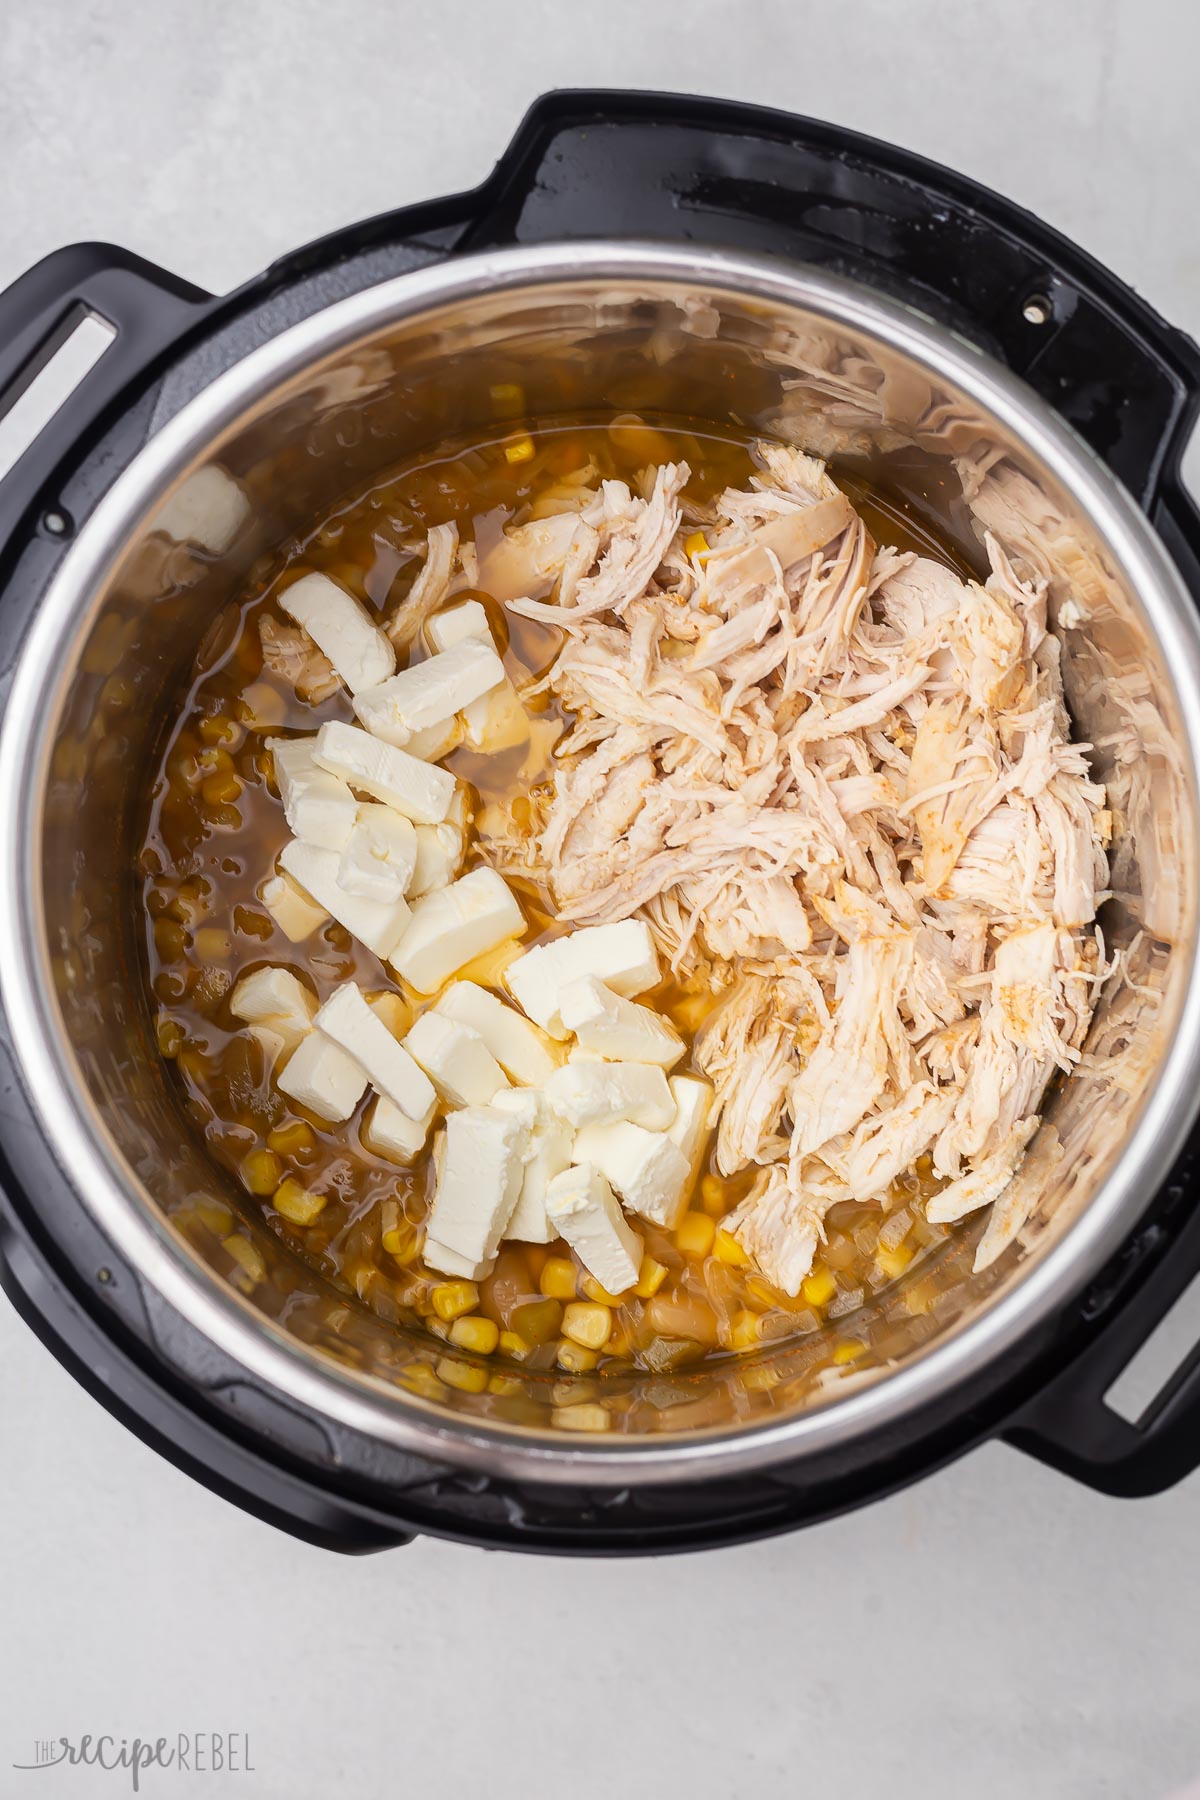 instant pot filled with shredded chicken, cream cheese, and other ingredients.